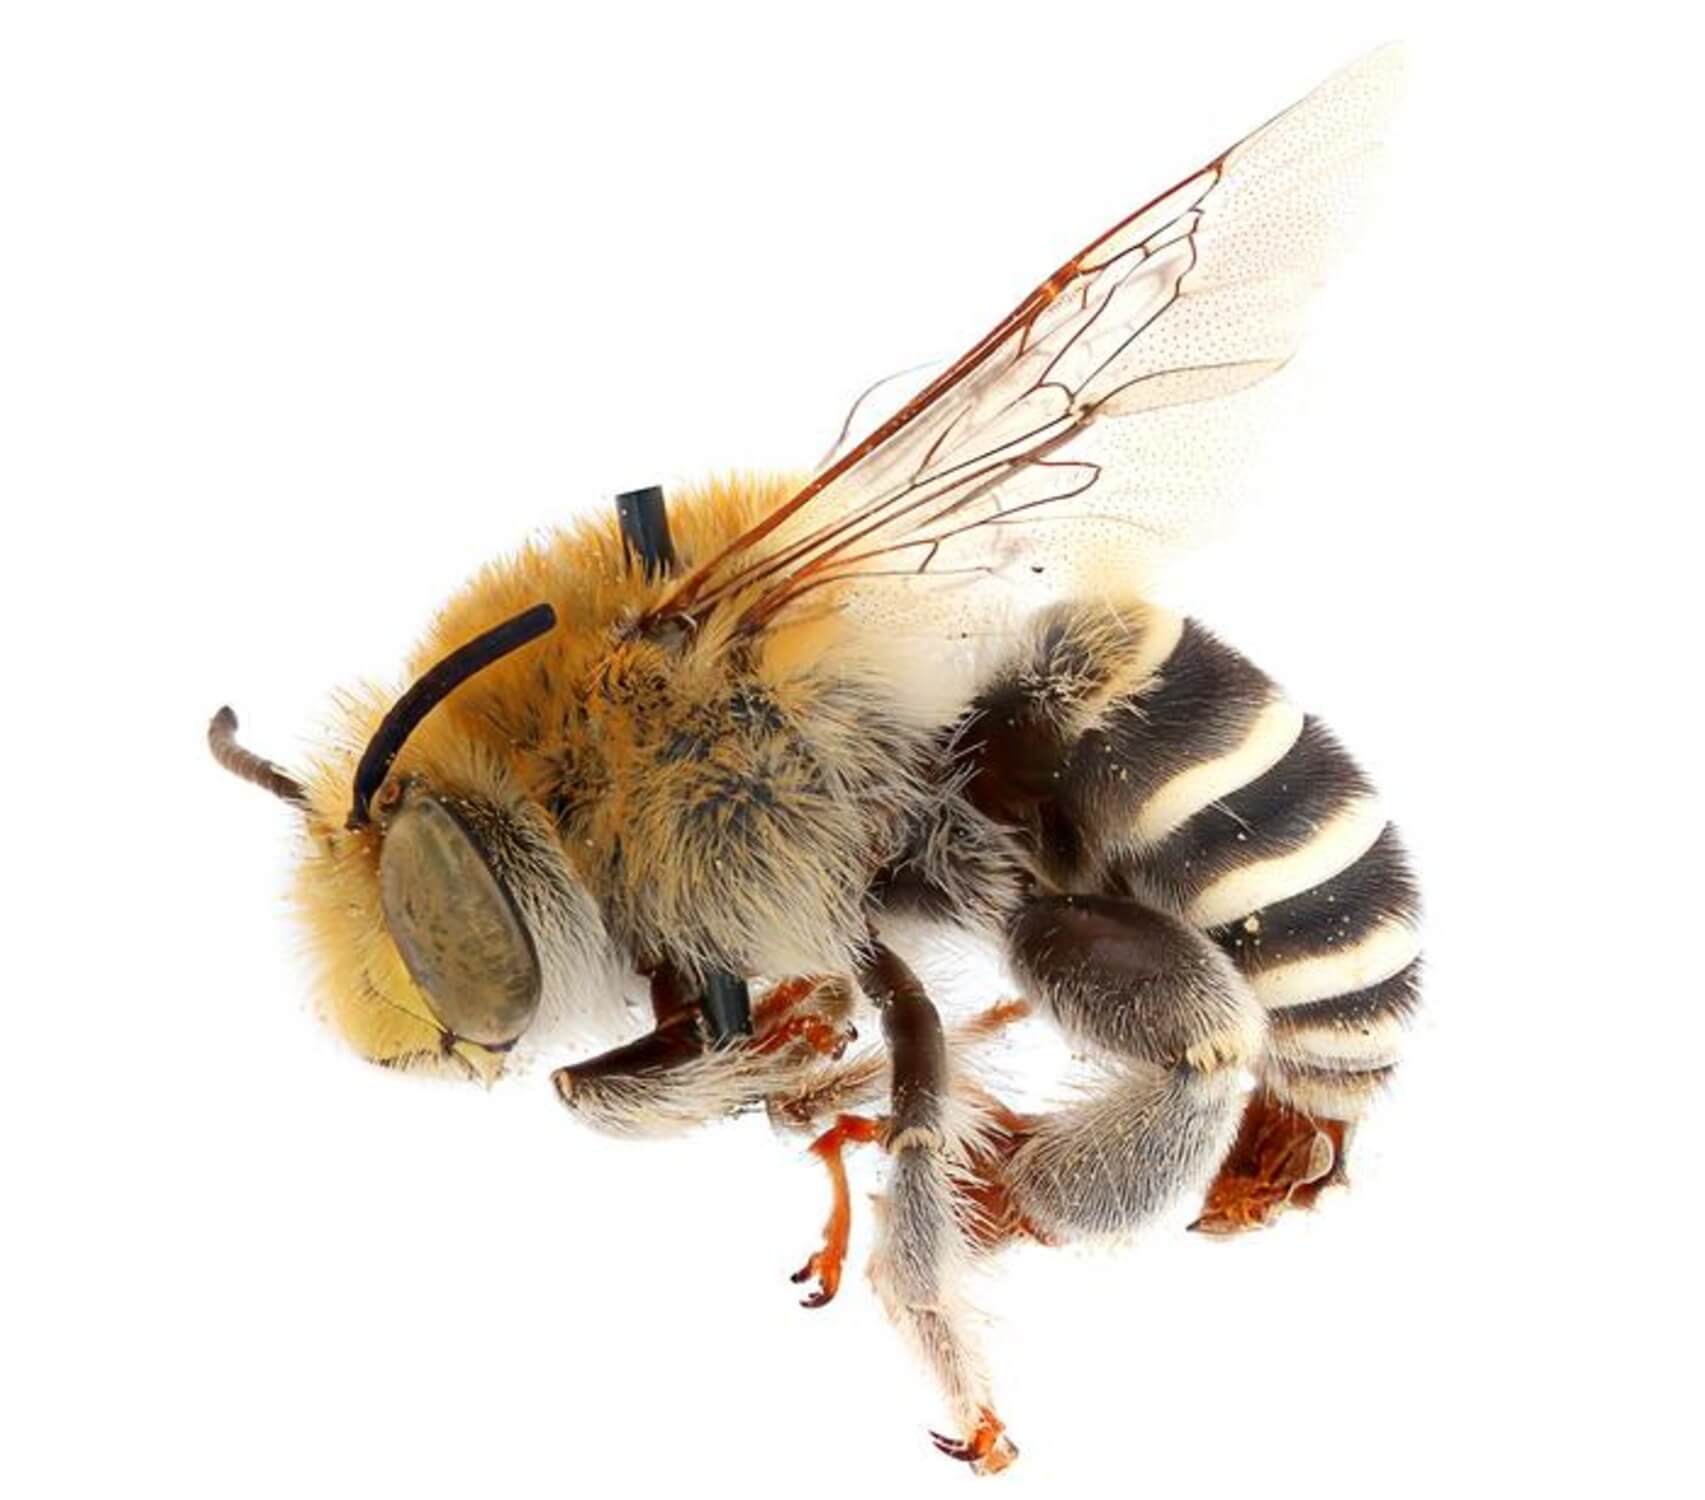 Photos of bees made using the team’s imaging system